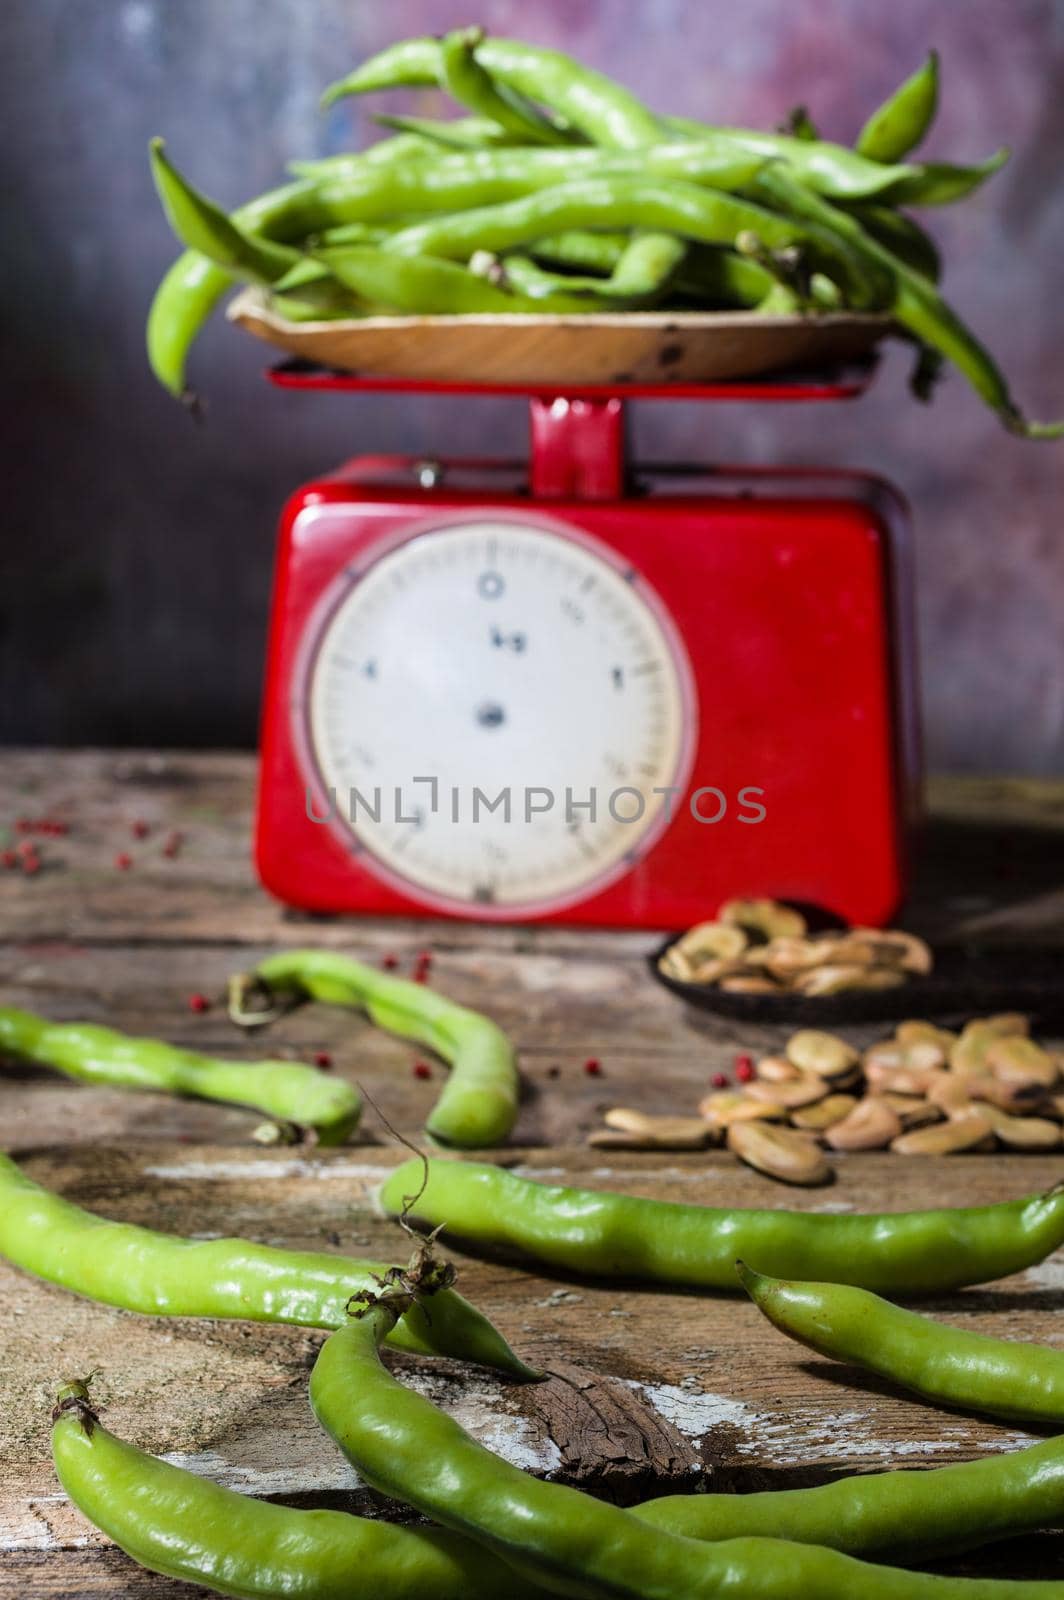 View of fresh and dried broad beans and weight scale in a wooden table